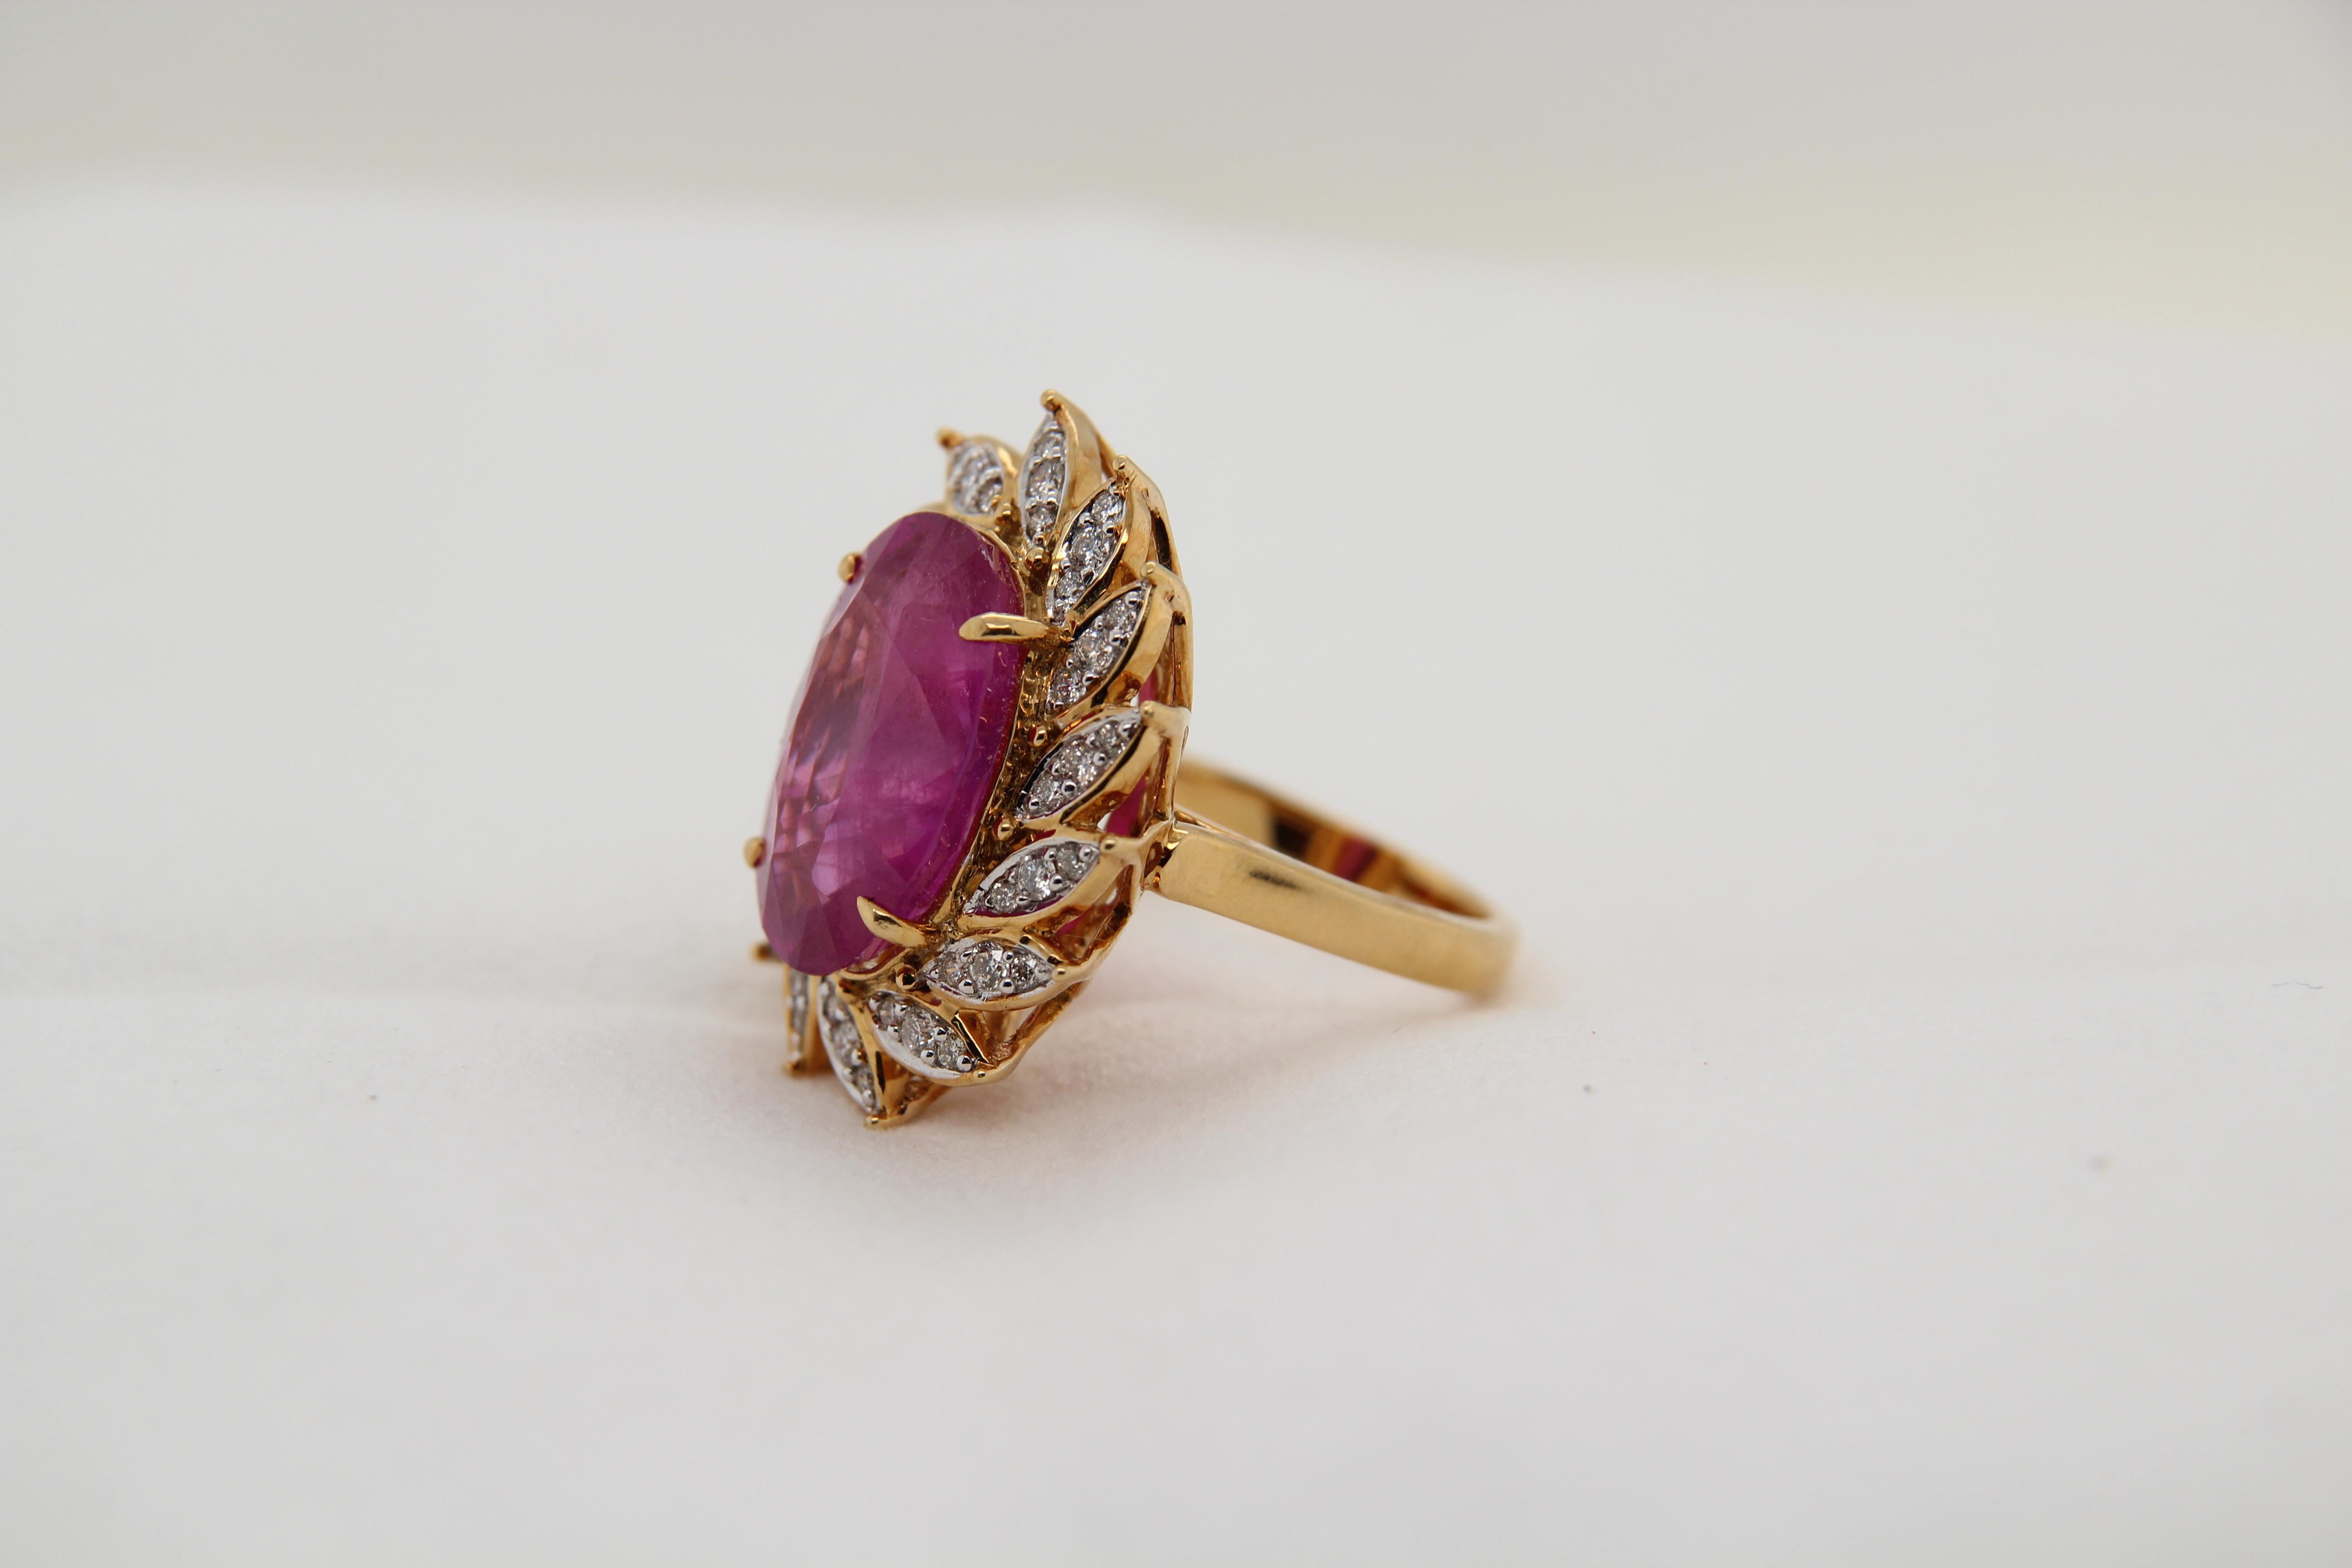 A new GRS certified Heated Burmese pink sapphire ring made in 18 Karat gold. The total ruby weight is 14.24 carats, the total diamond weight is 0.56 carats, and the total ring weighs 13.65 grams. This ring is resizable. 